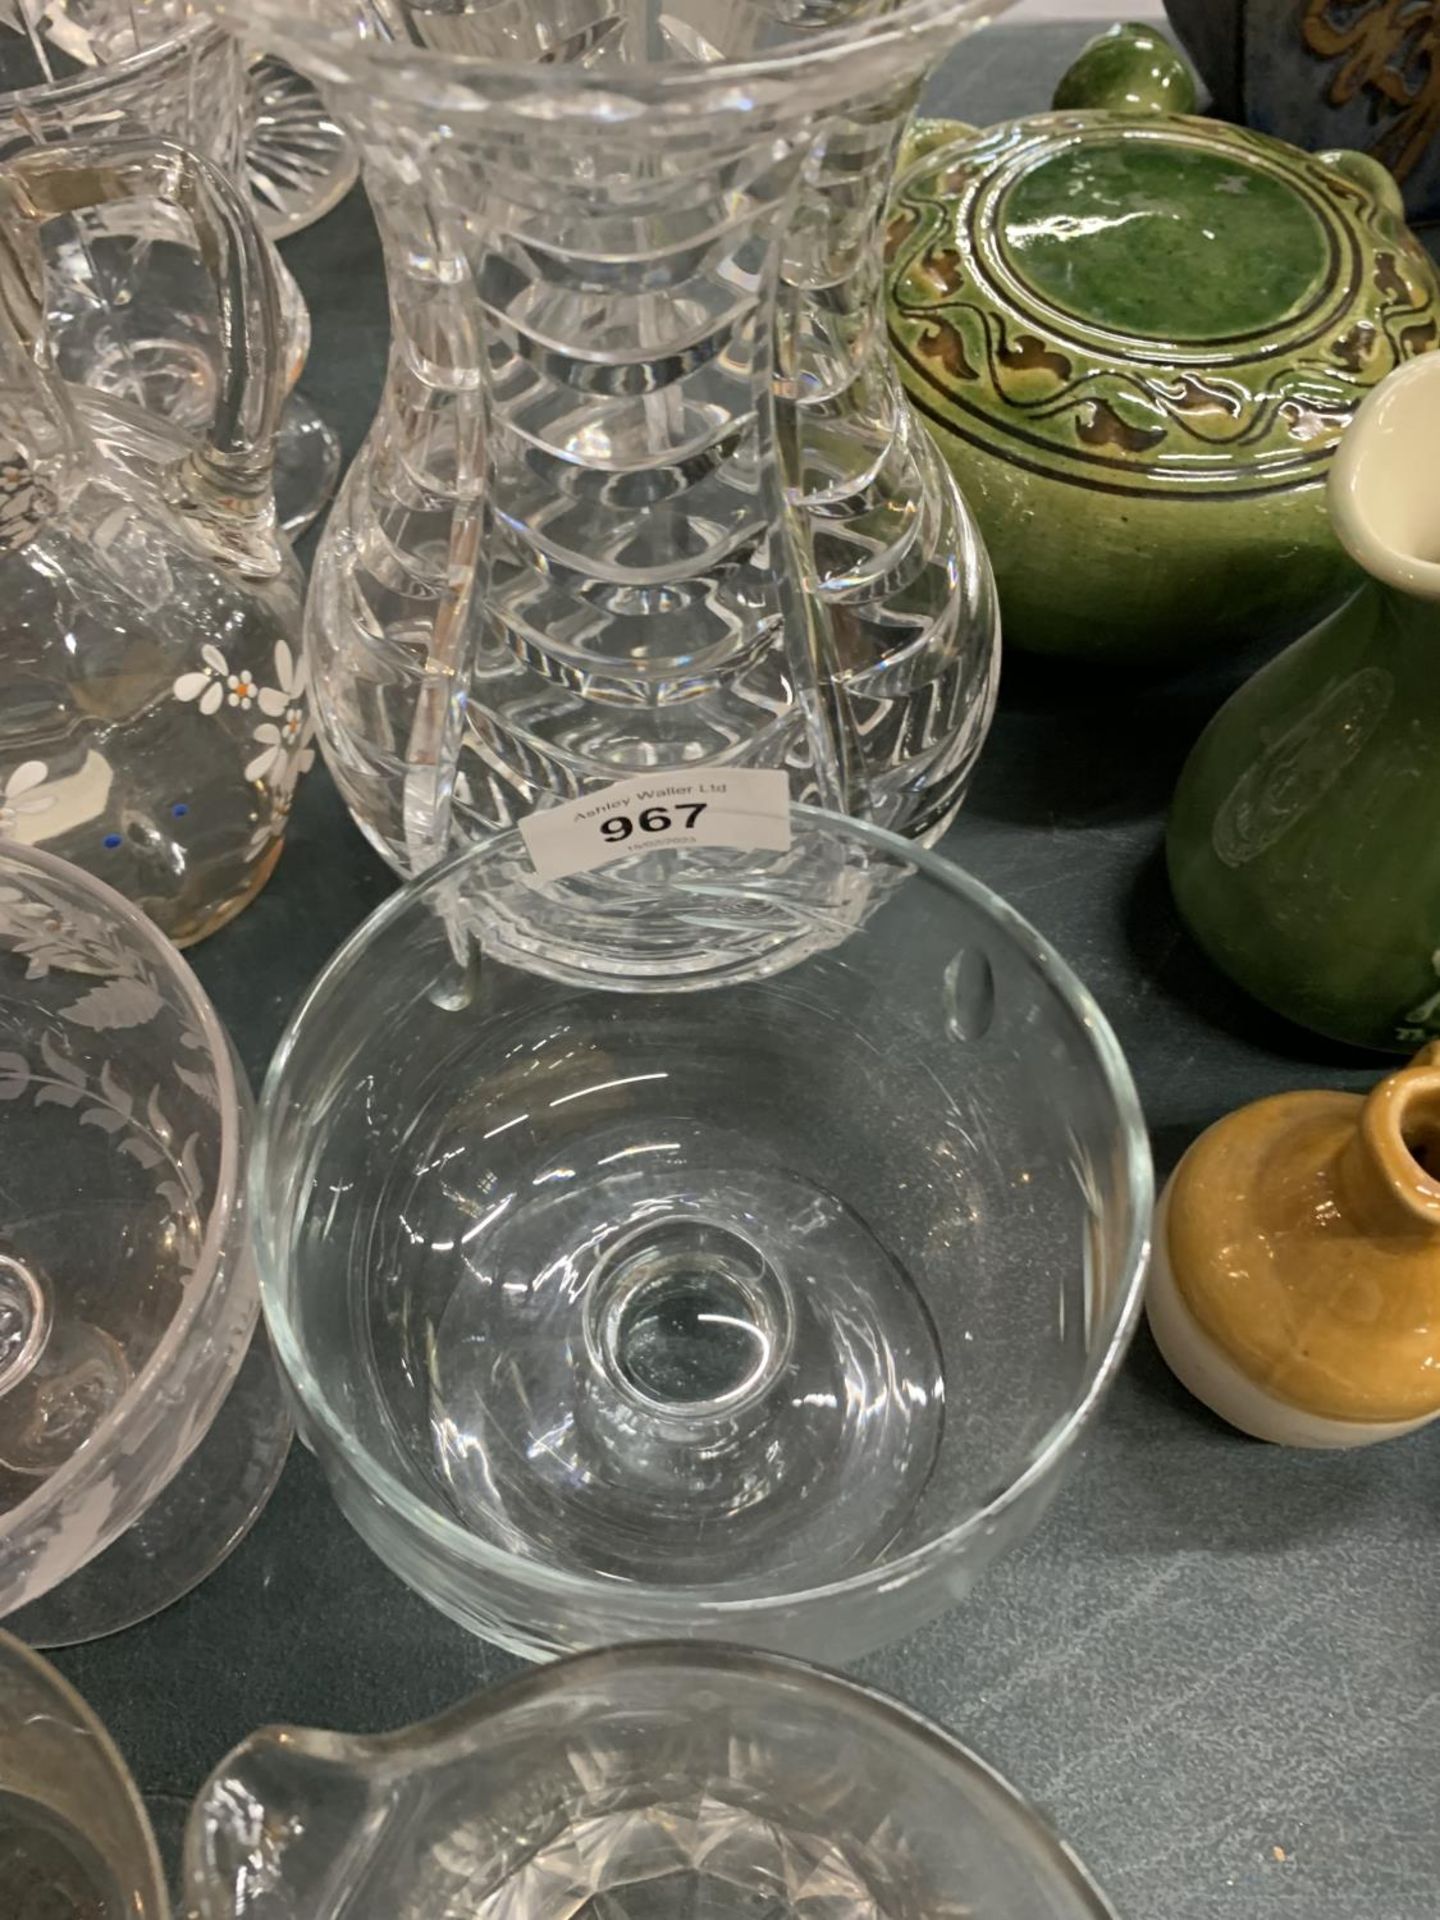 A QUANTITY OF VINTAGE CLEAR GLASSWARE TO INCLUDE A CLARET JUG, VASES, JUGS, BOWLS, ETC - Image 7 of 7